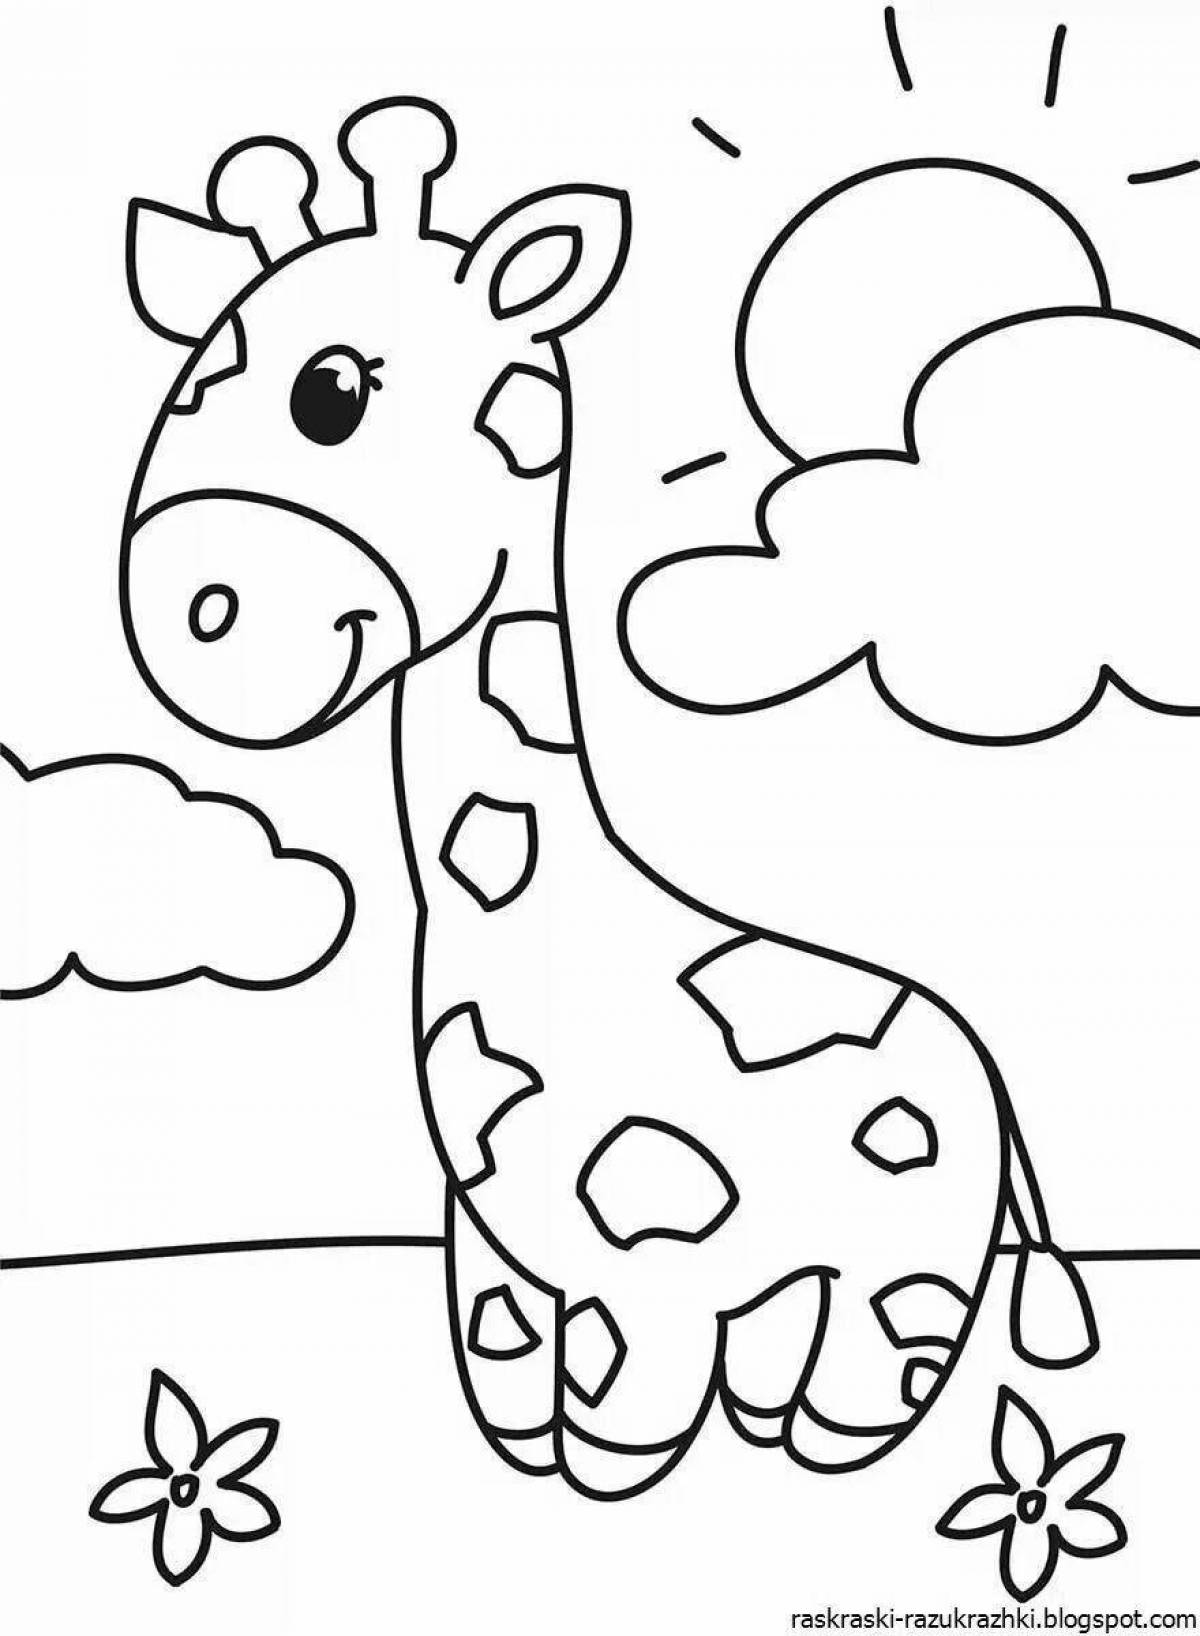 Fun coloring for children 5 years old